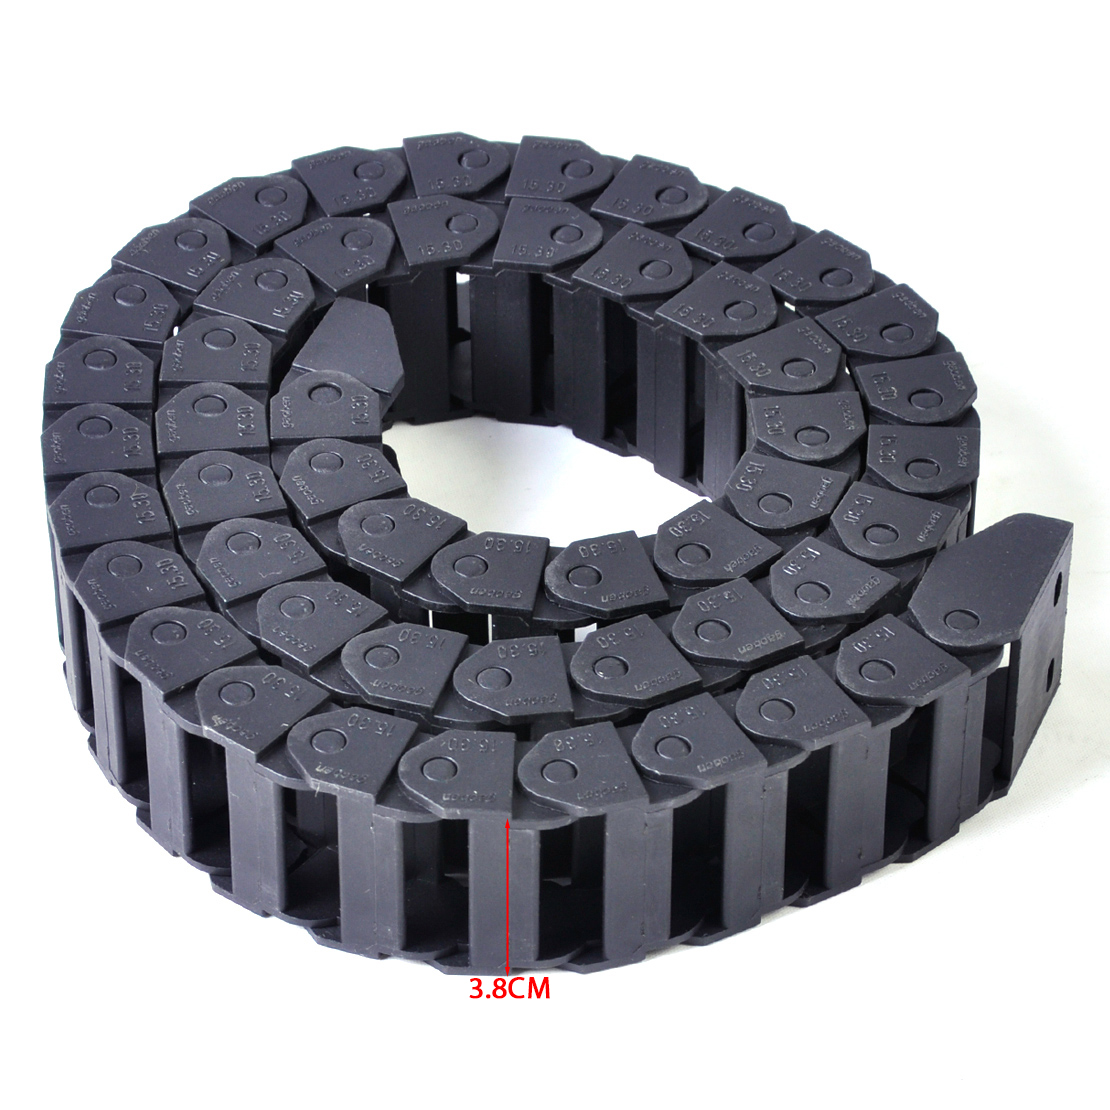 Black Nylon Energy Chain Drag Cable Towline Carrier Wire For CNC Router Mill asd